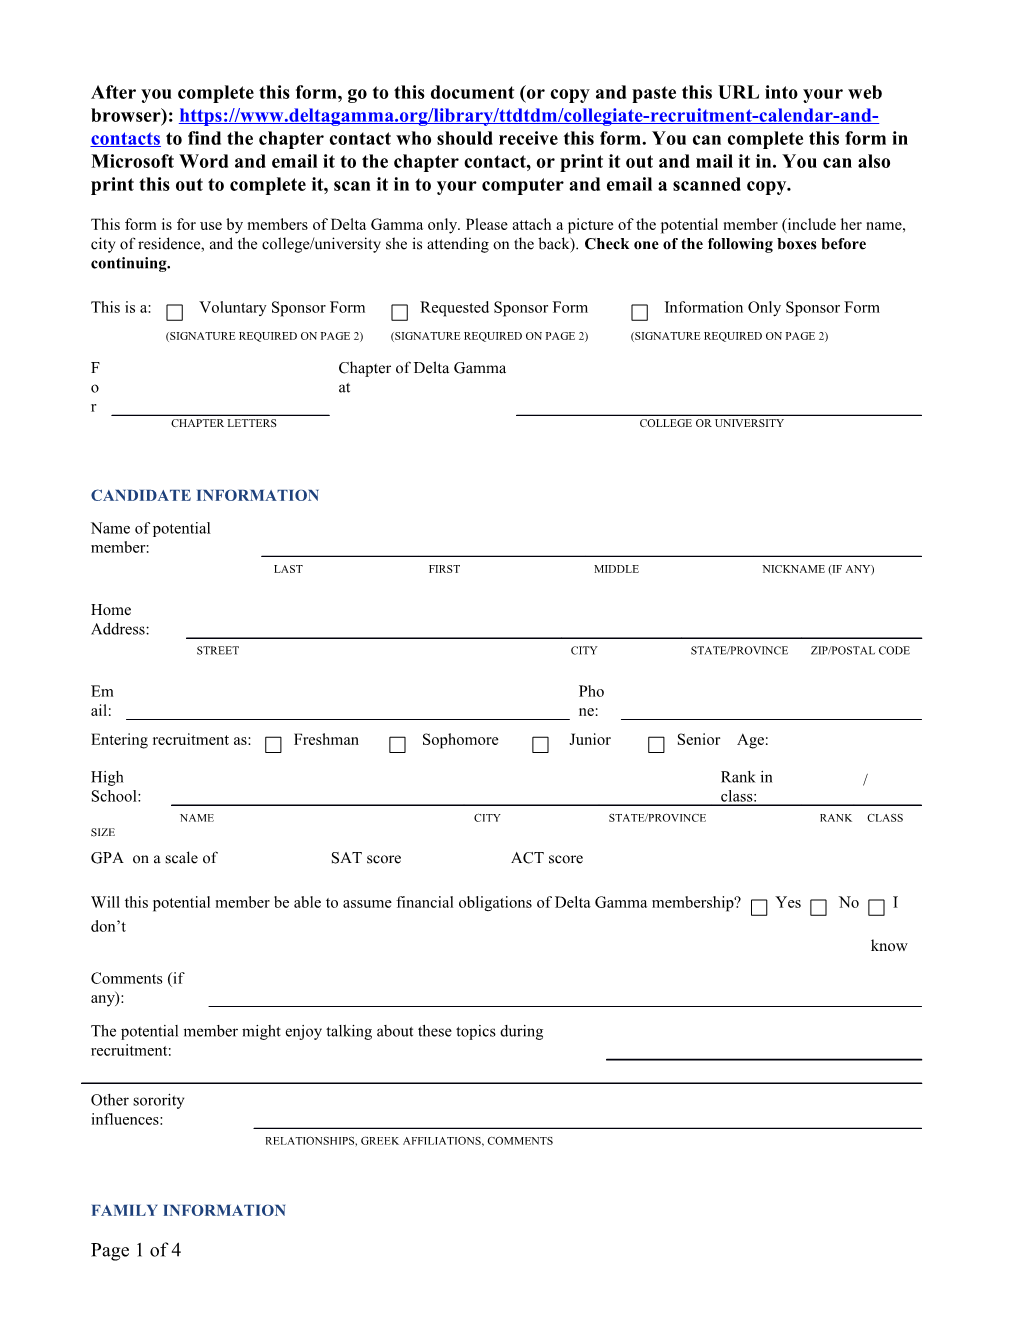 This Form Is for Use by Members of Delta Gamma Only